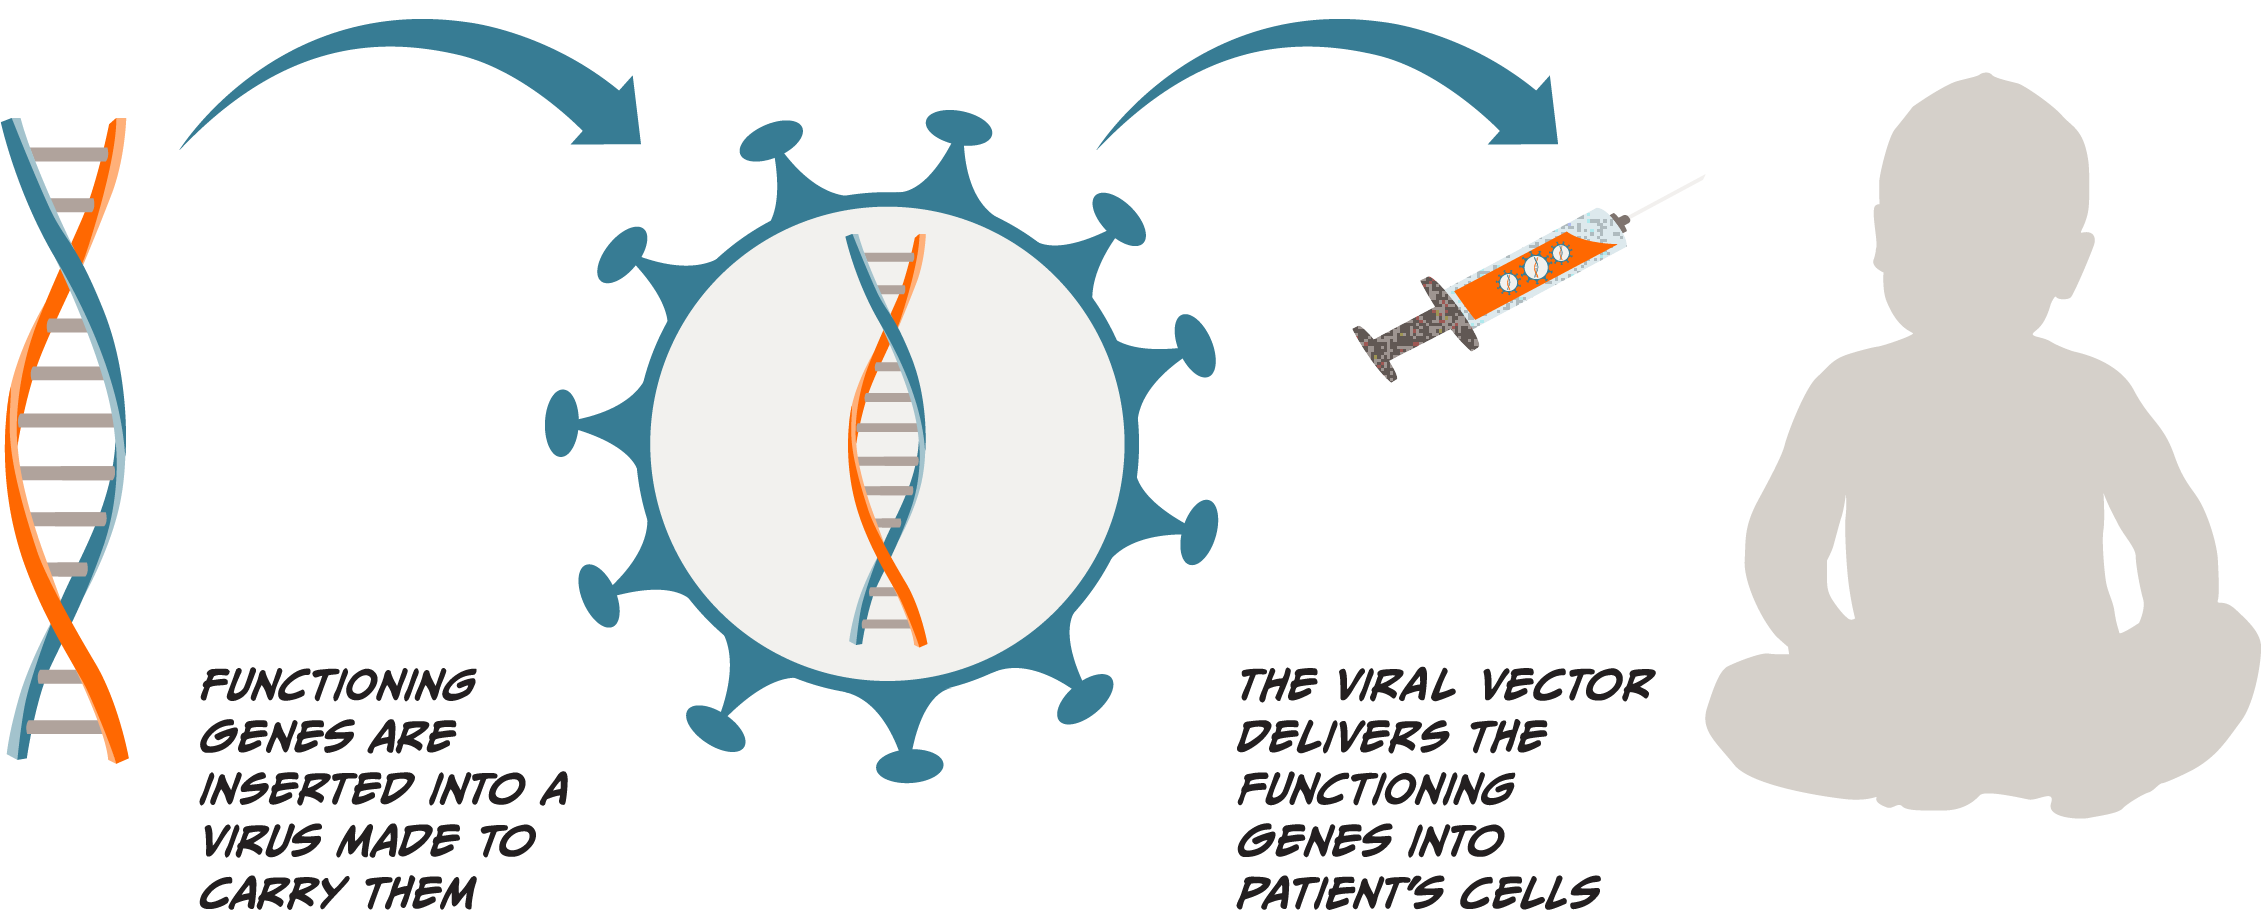 Illustrative diagram showing two steps for how gene therapy works. One, functioning genes are inserted into a virus made to carry them, a double helix and virus cell are illustrated with an arrow pointing to the next step. Two, The viral vector delivers the functioning genes into the patient's cells, with a syringe containing the viral vector near an illustration of the patient.